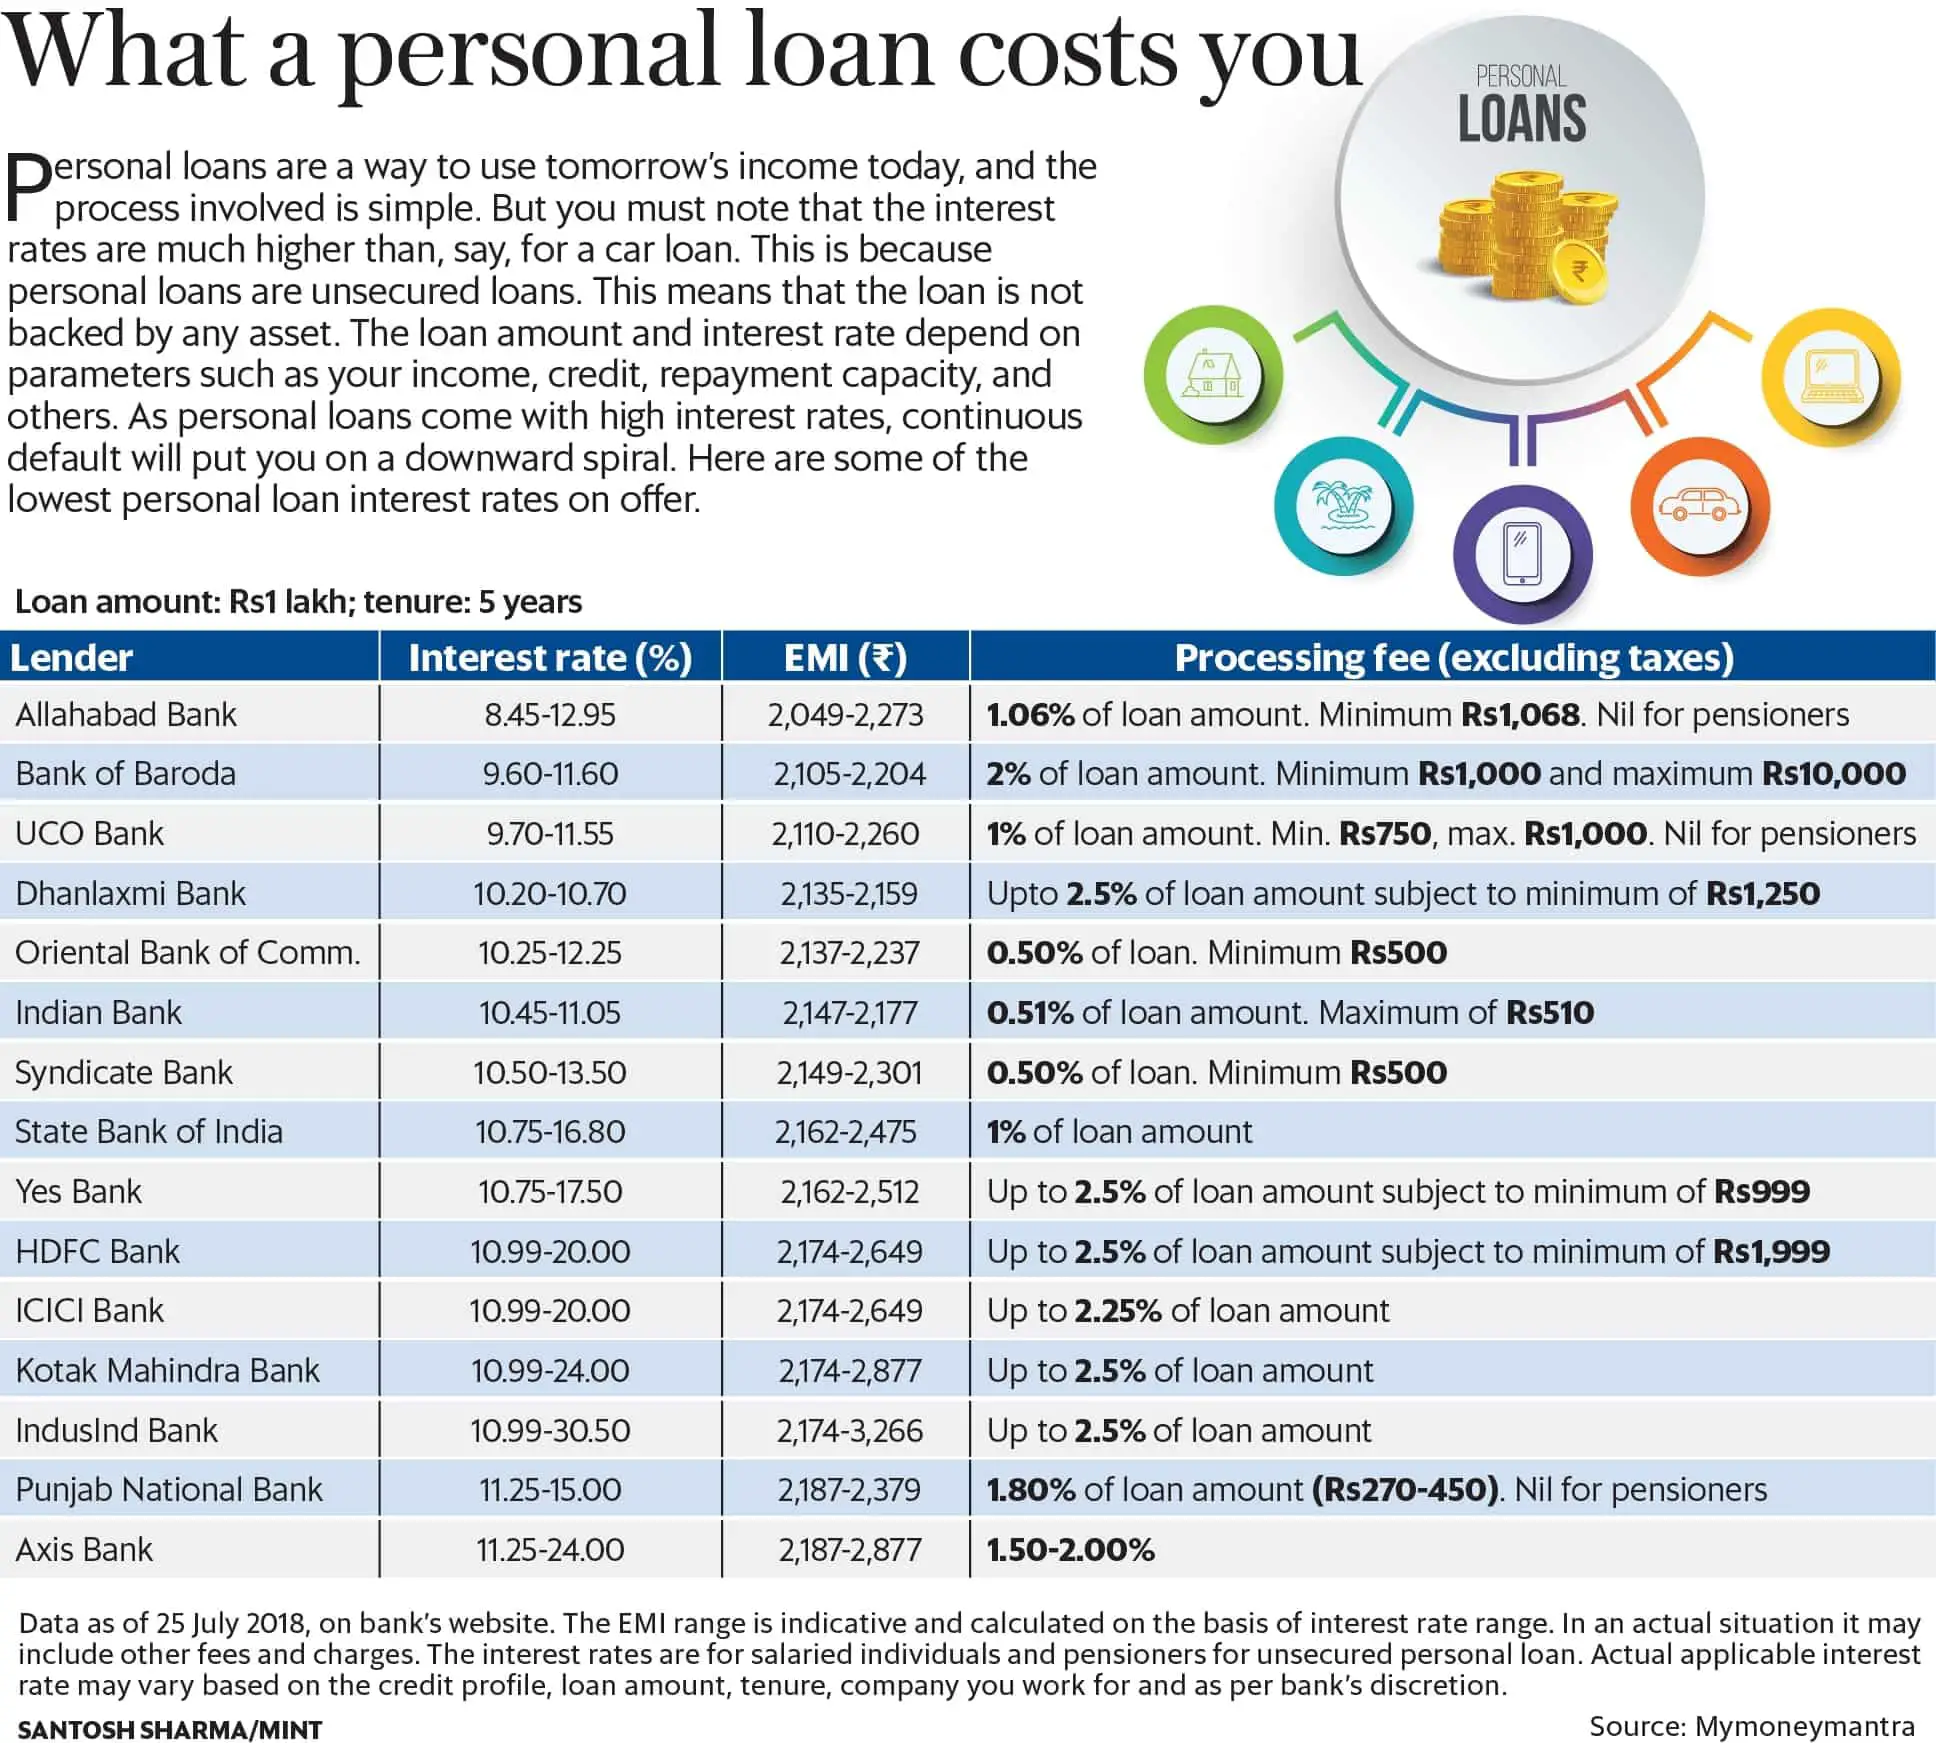 Personal loan interest rates, EMIs and charges